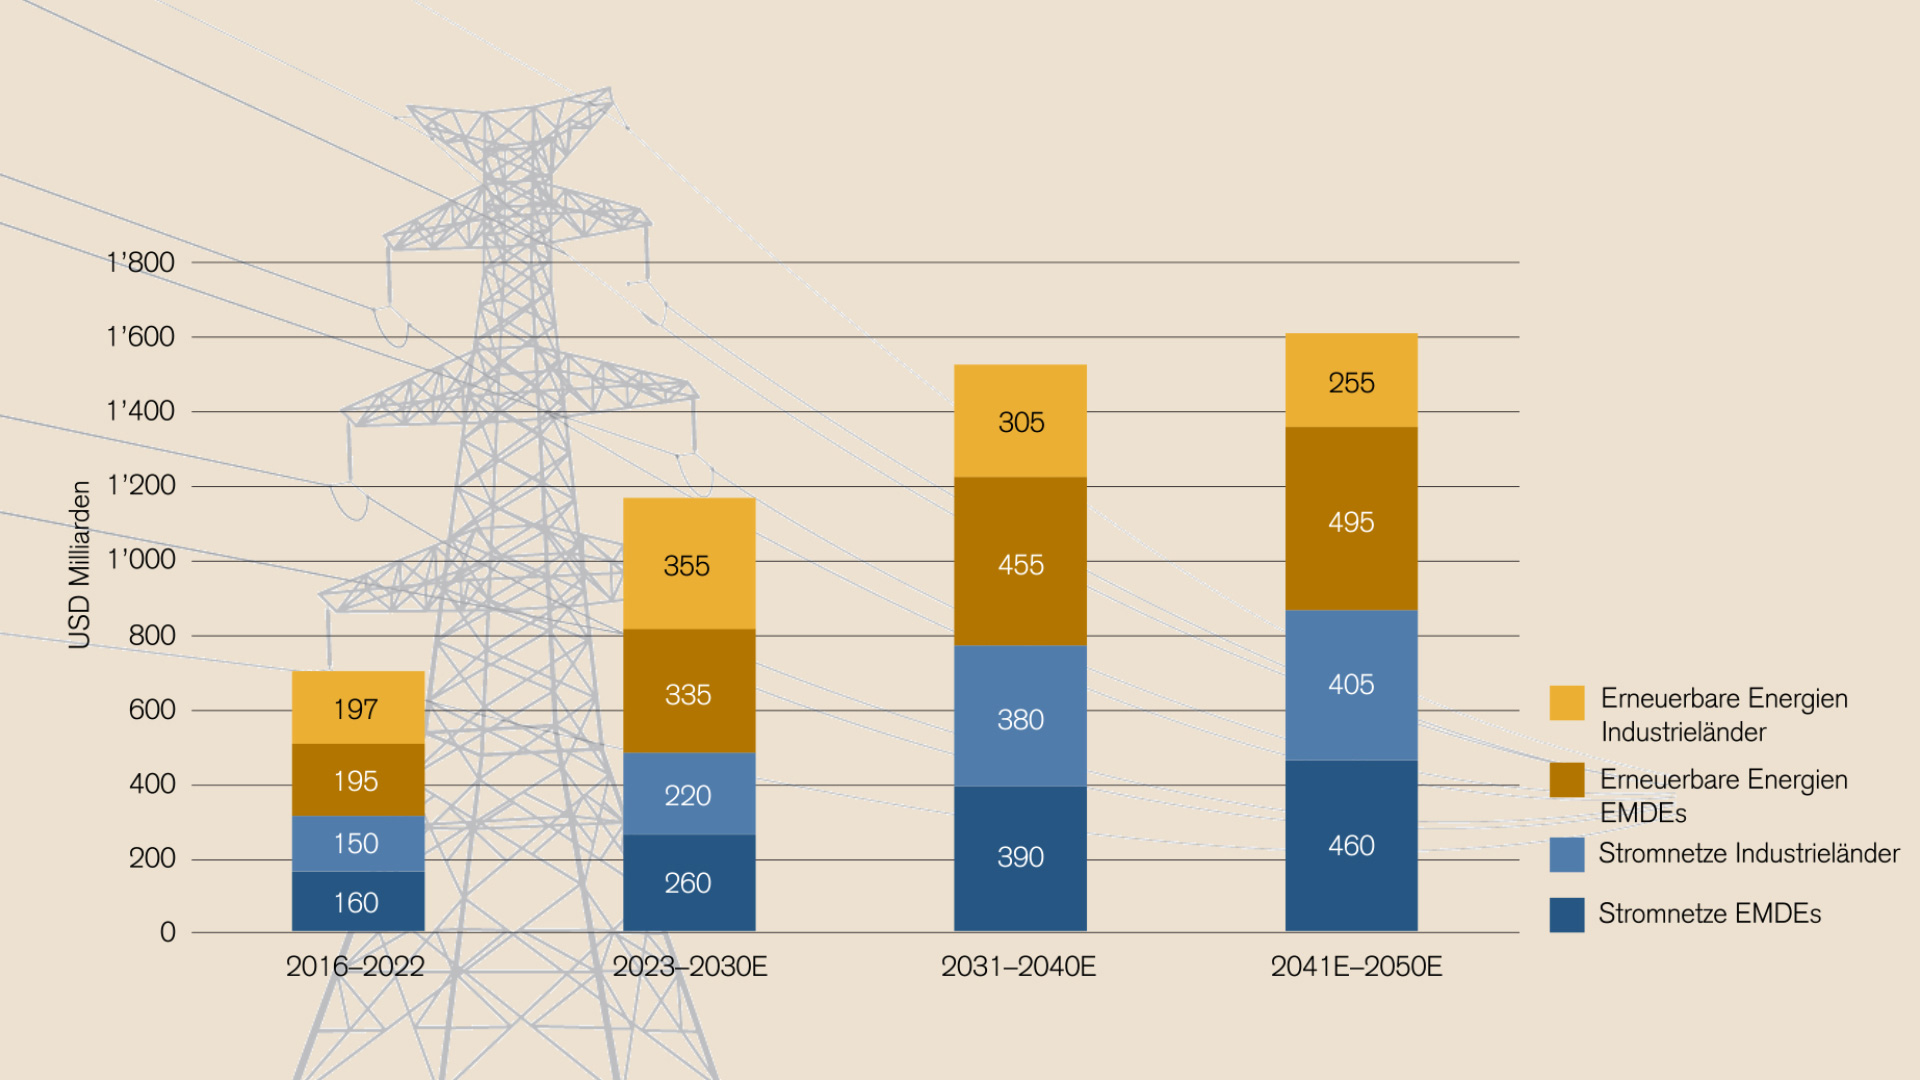 Annual investments in renewable energy sources and electricity grids 